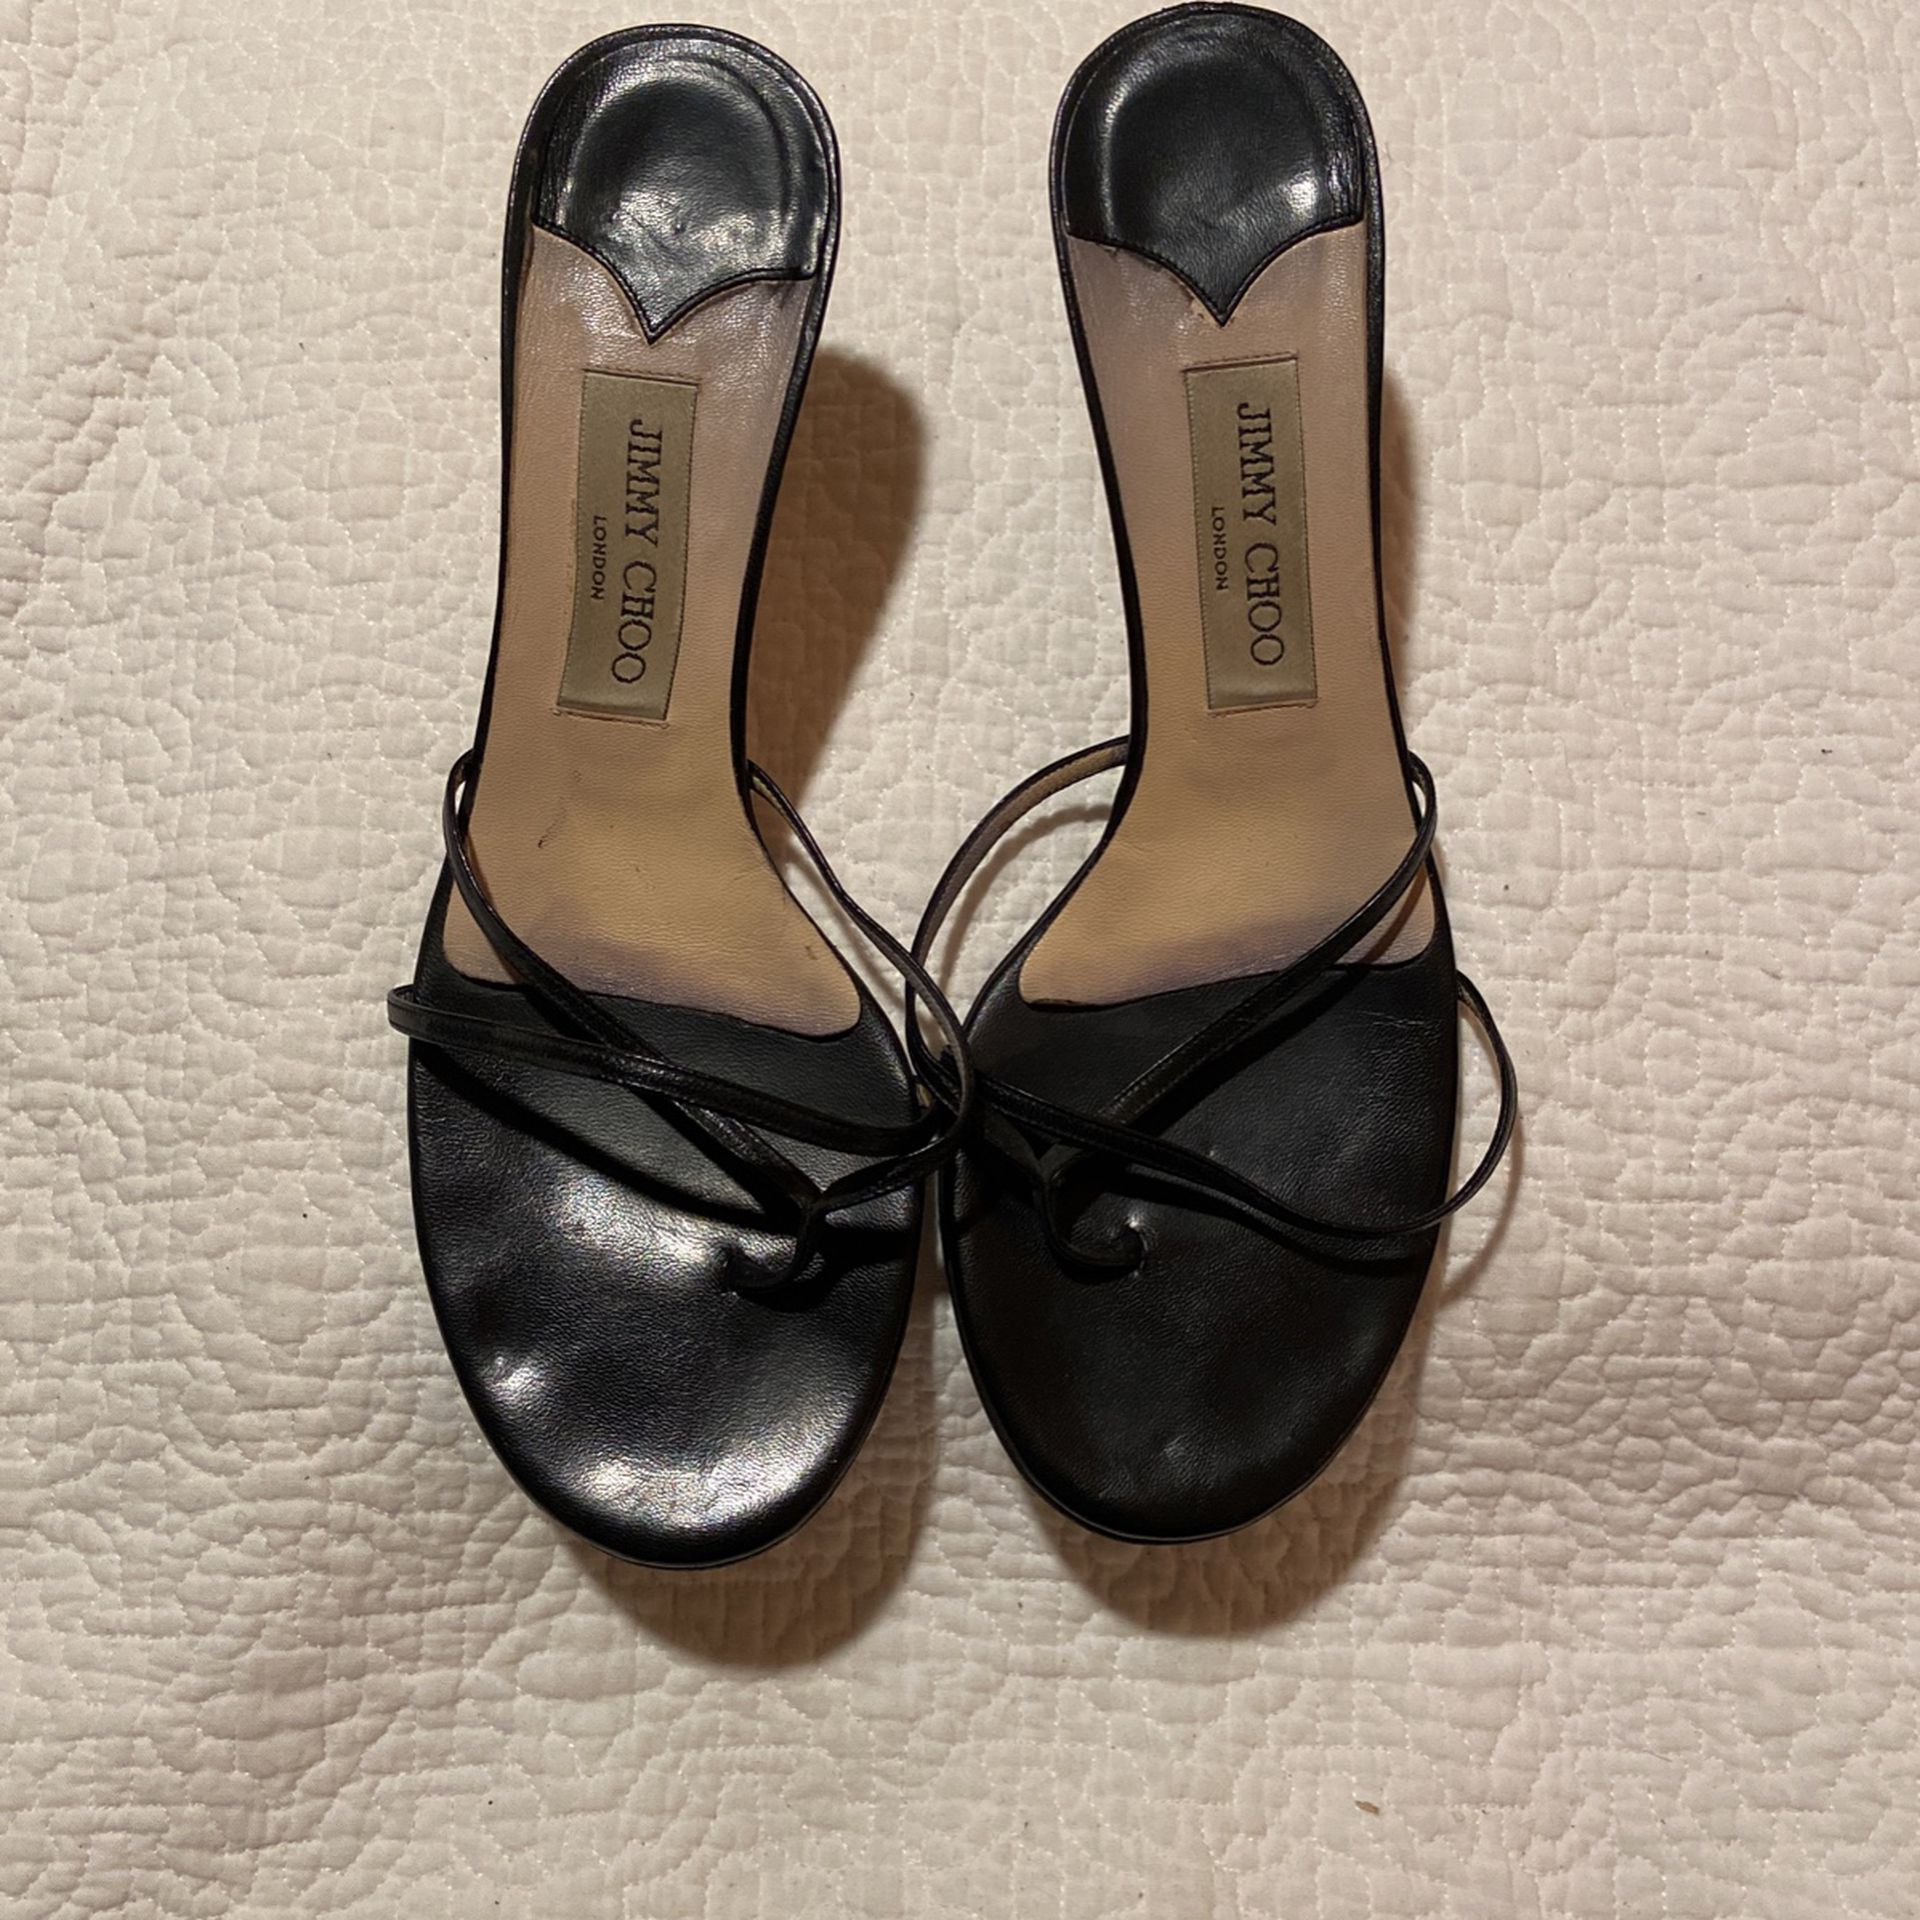 Jimmy Choo Heeled Strappy Sandals Black Leather Size  39.5 Euro